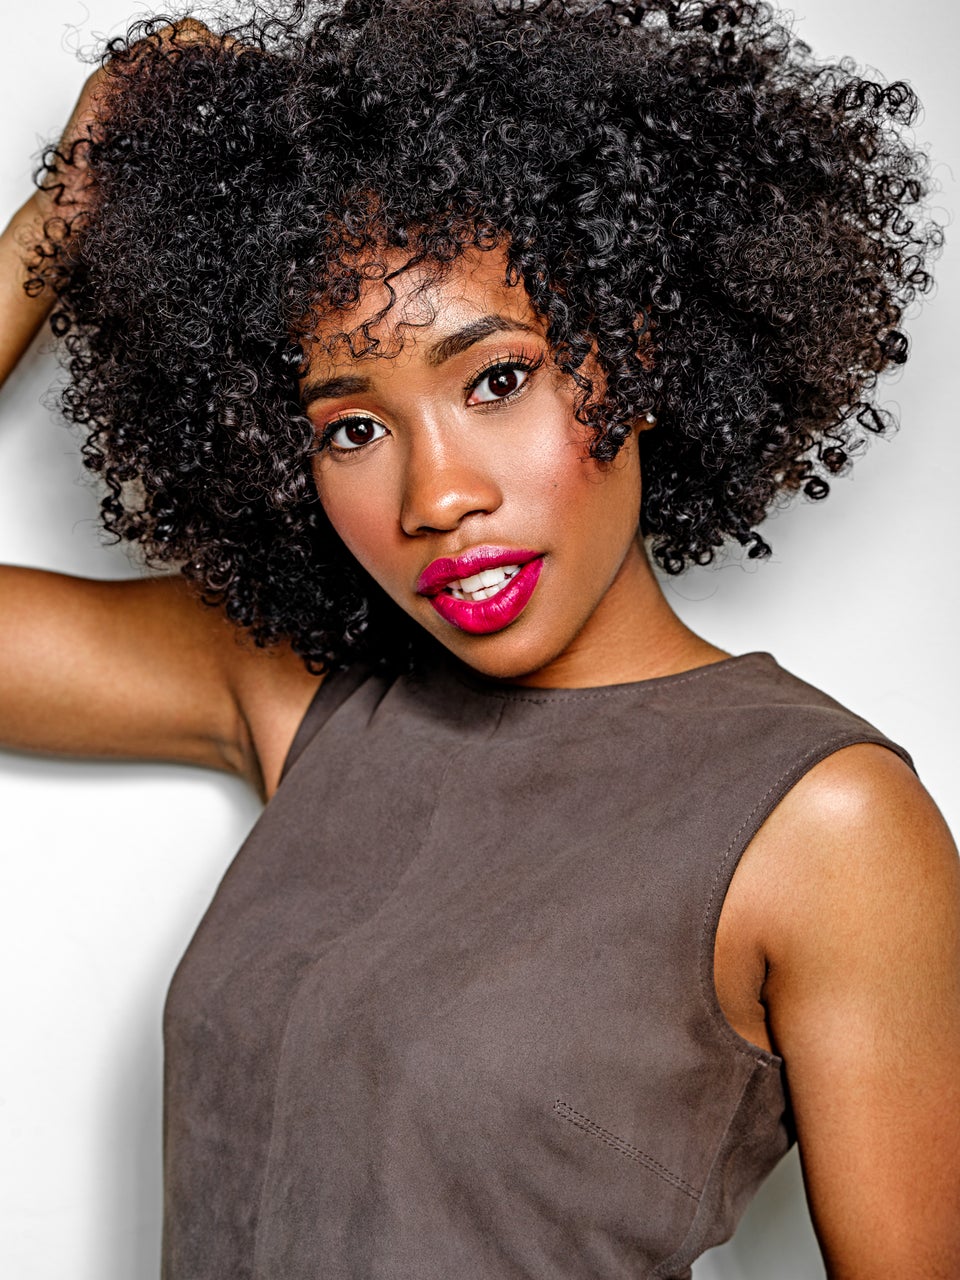 ‘The Quad’ Actress Zoe Renee Opens Up About Her Love Of Acting And Being The Daughter Of A Music Icon